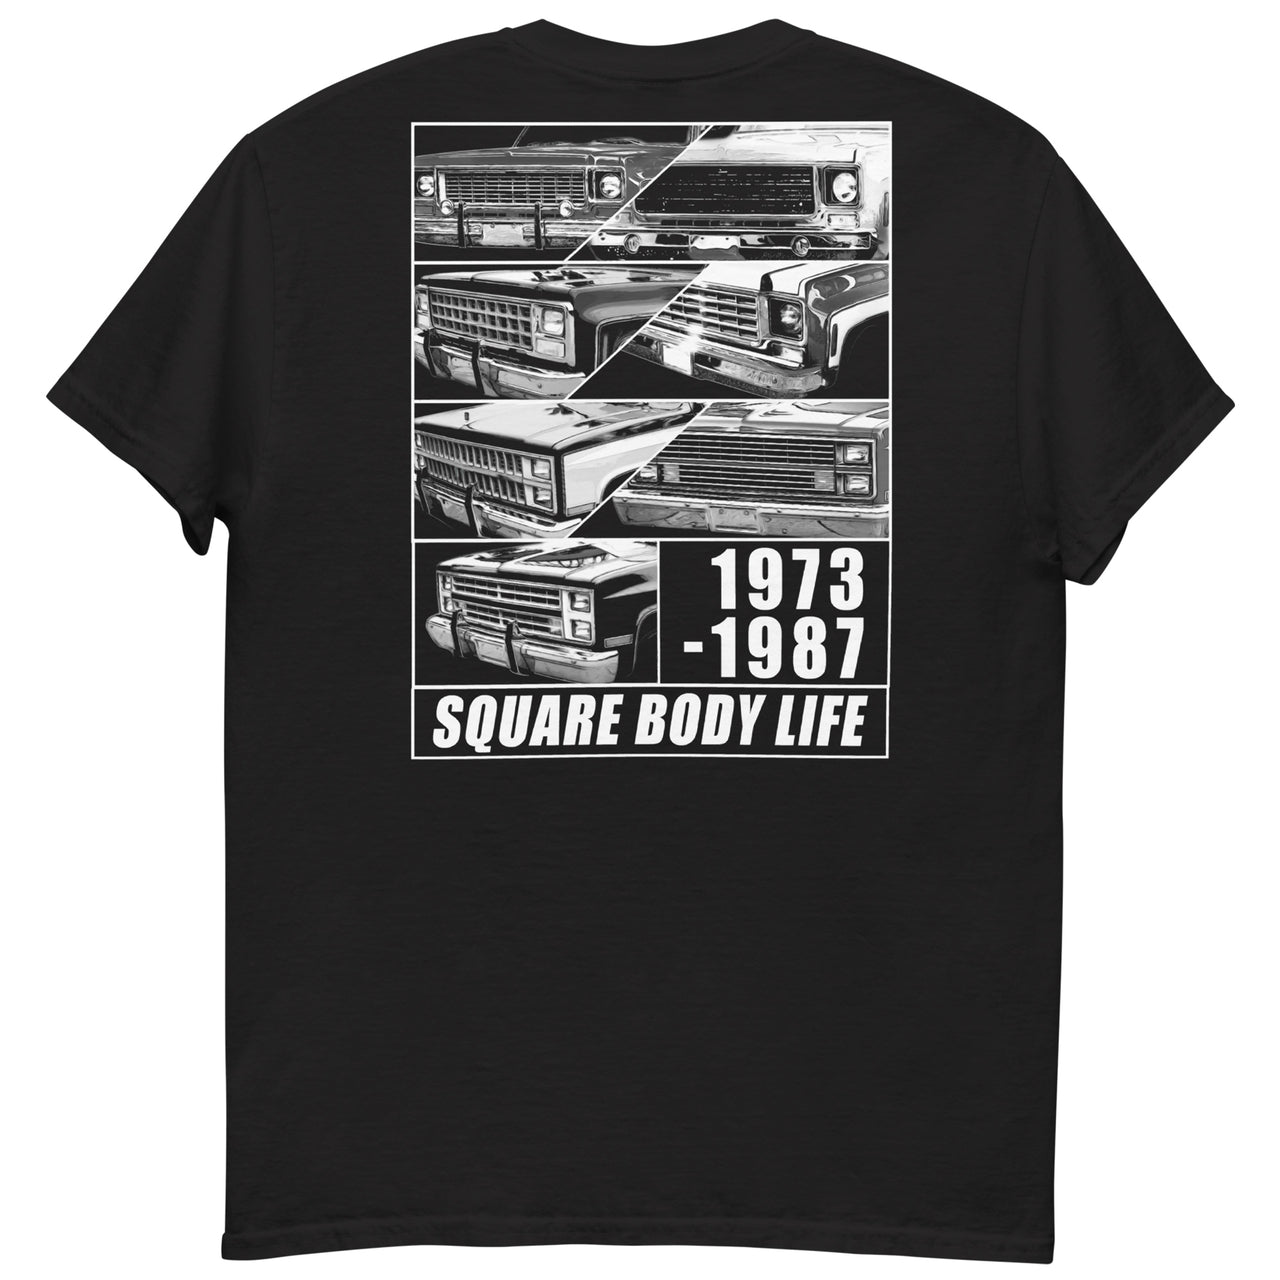 Square Body Life T-Shirt in black back view